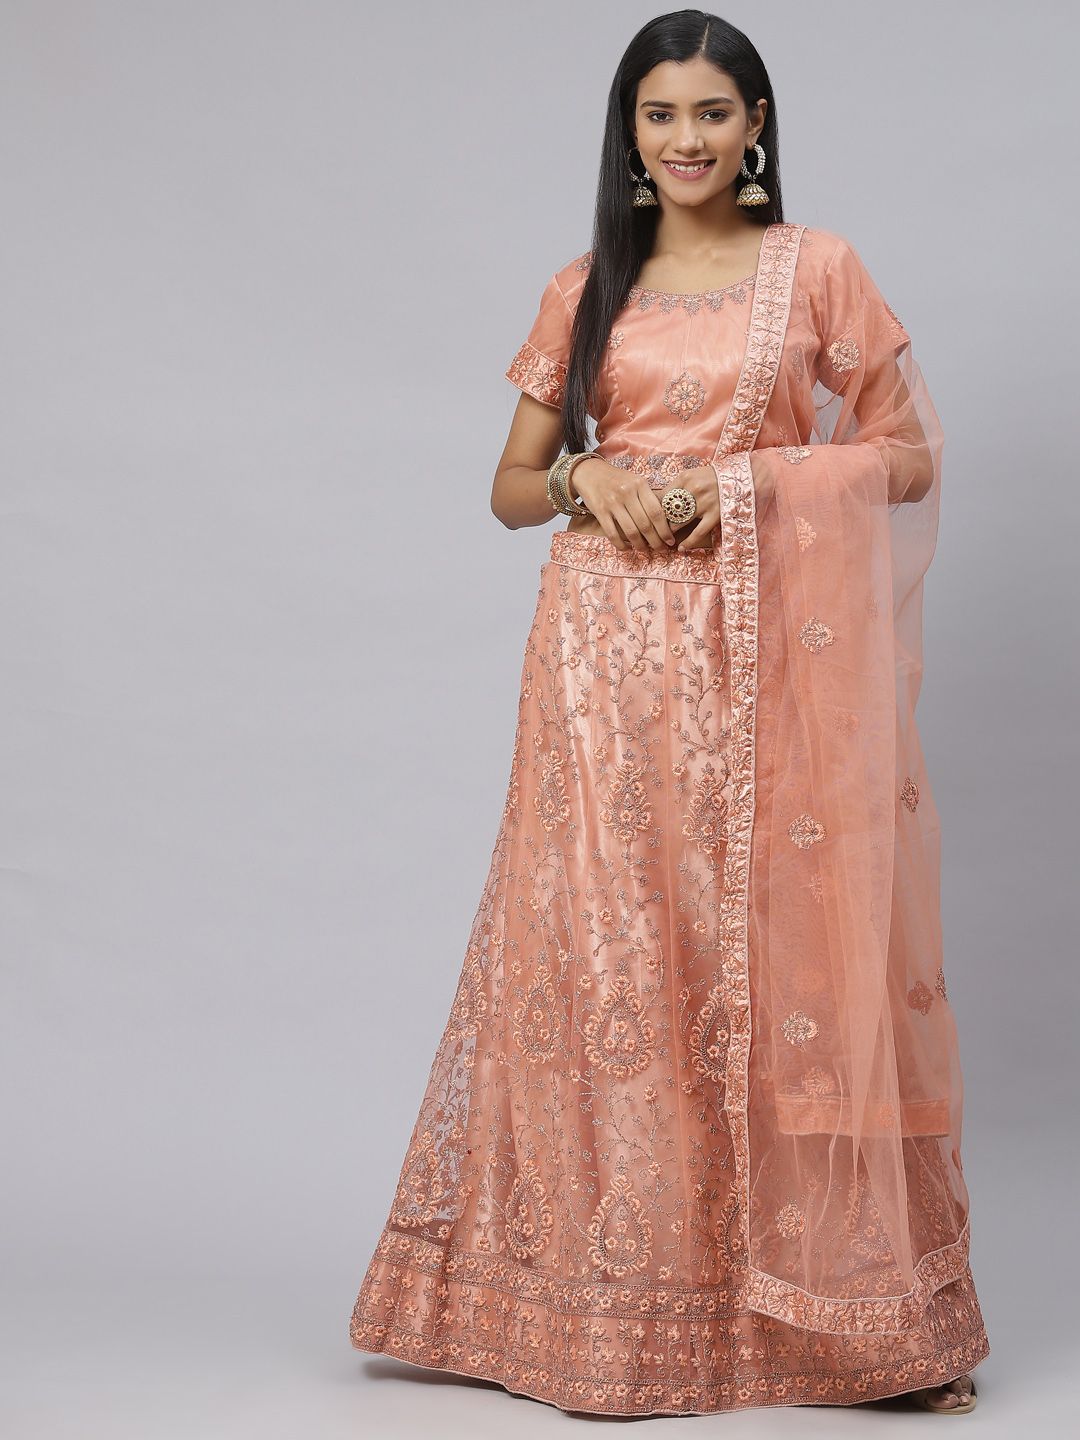 Readiprint Fashions Peach-Coloured Embroidered Semi-Stitched Lehenga & Unstitched Blouse With Dupatta Price in India